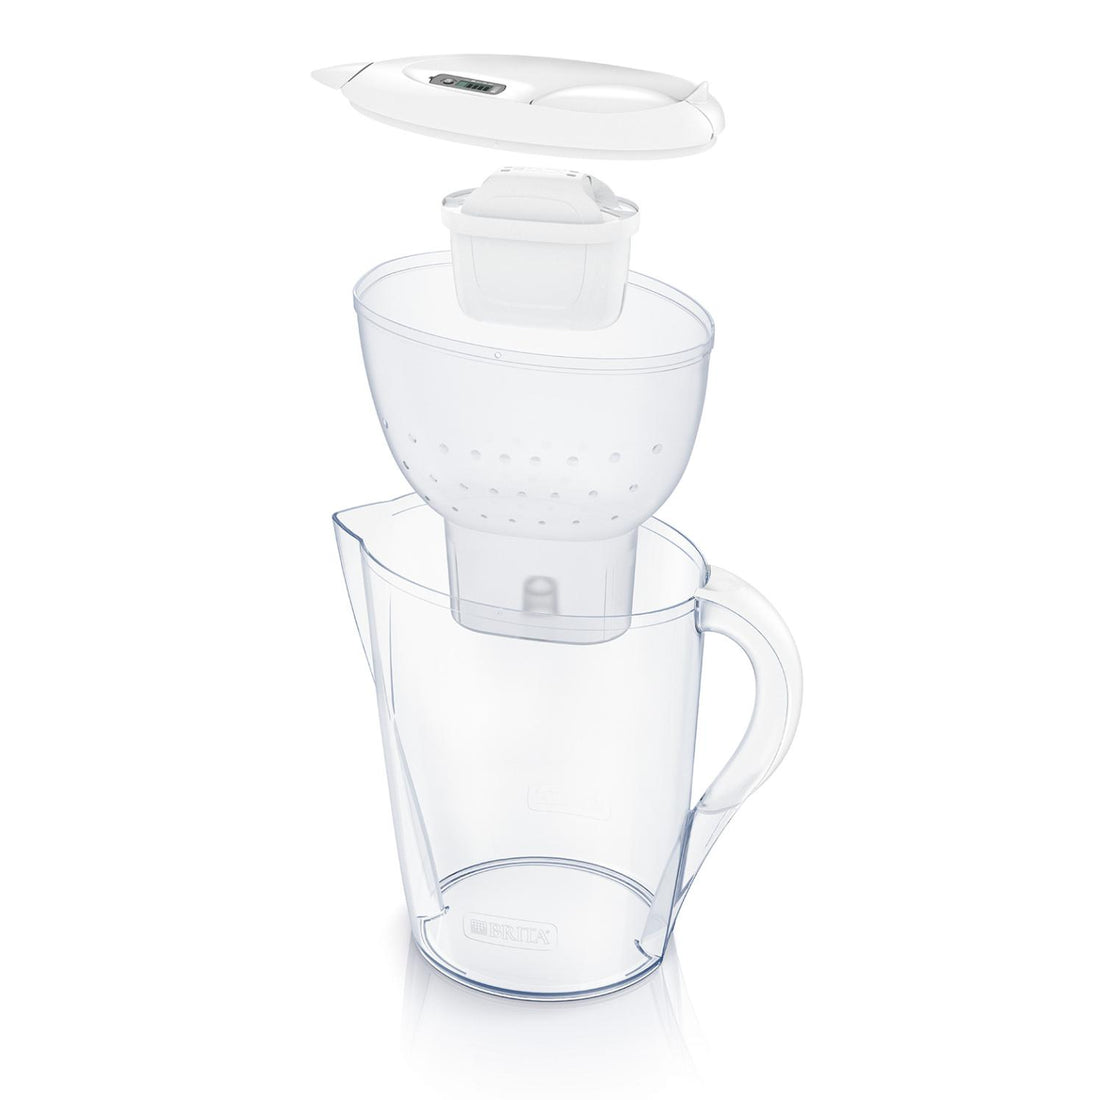 MARELLA COOL WHITE (2,4 L) & 2 MAXTRA+ CARTOUCHES + BOUTEILLE THERMOS 